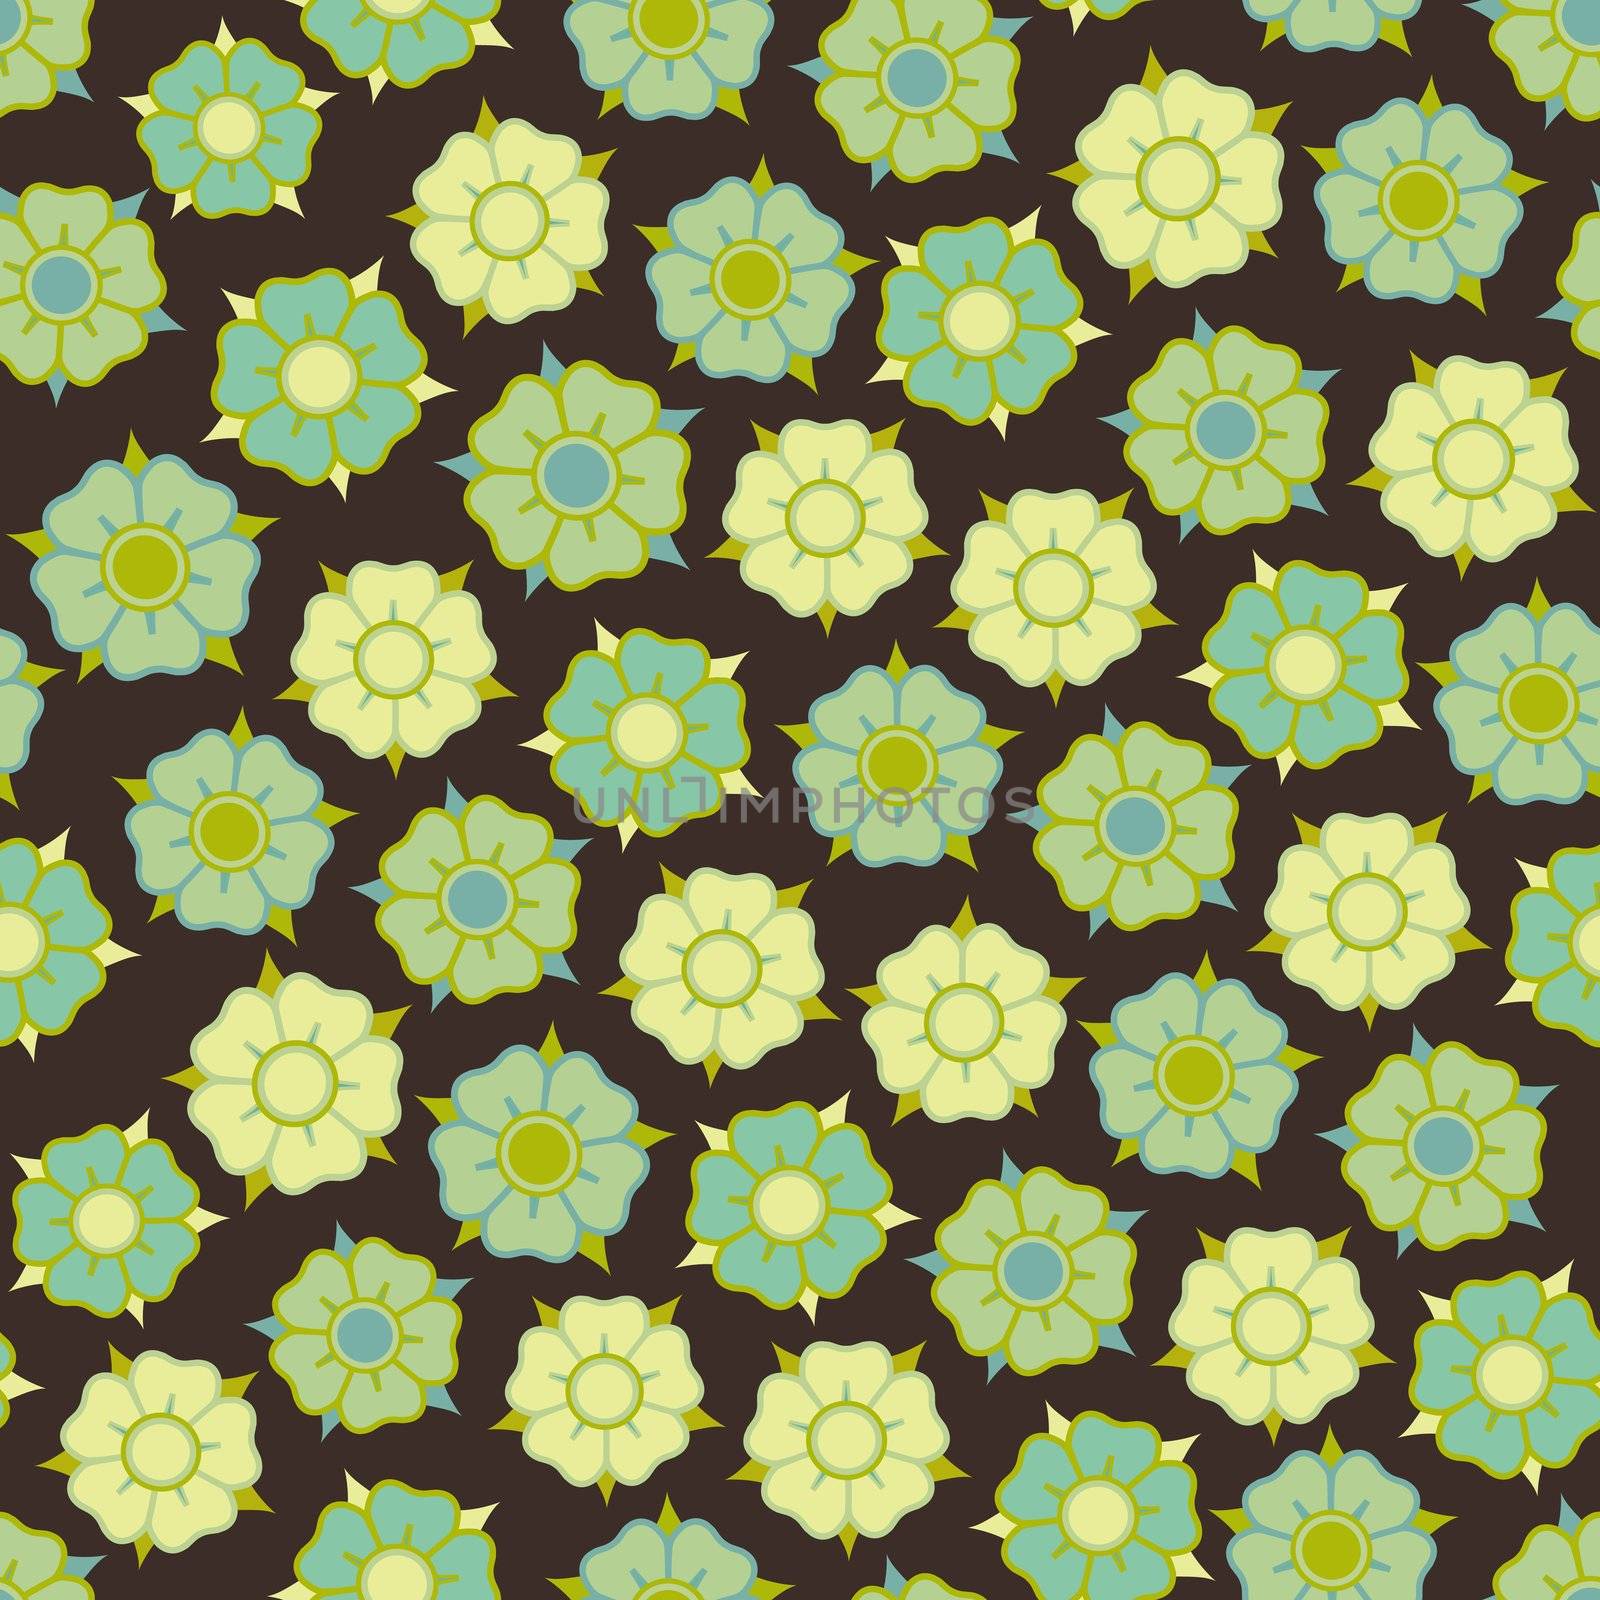 design with seamless flowers pattern by robertosch